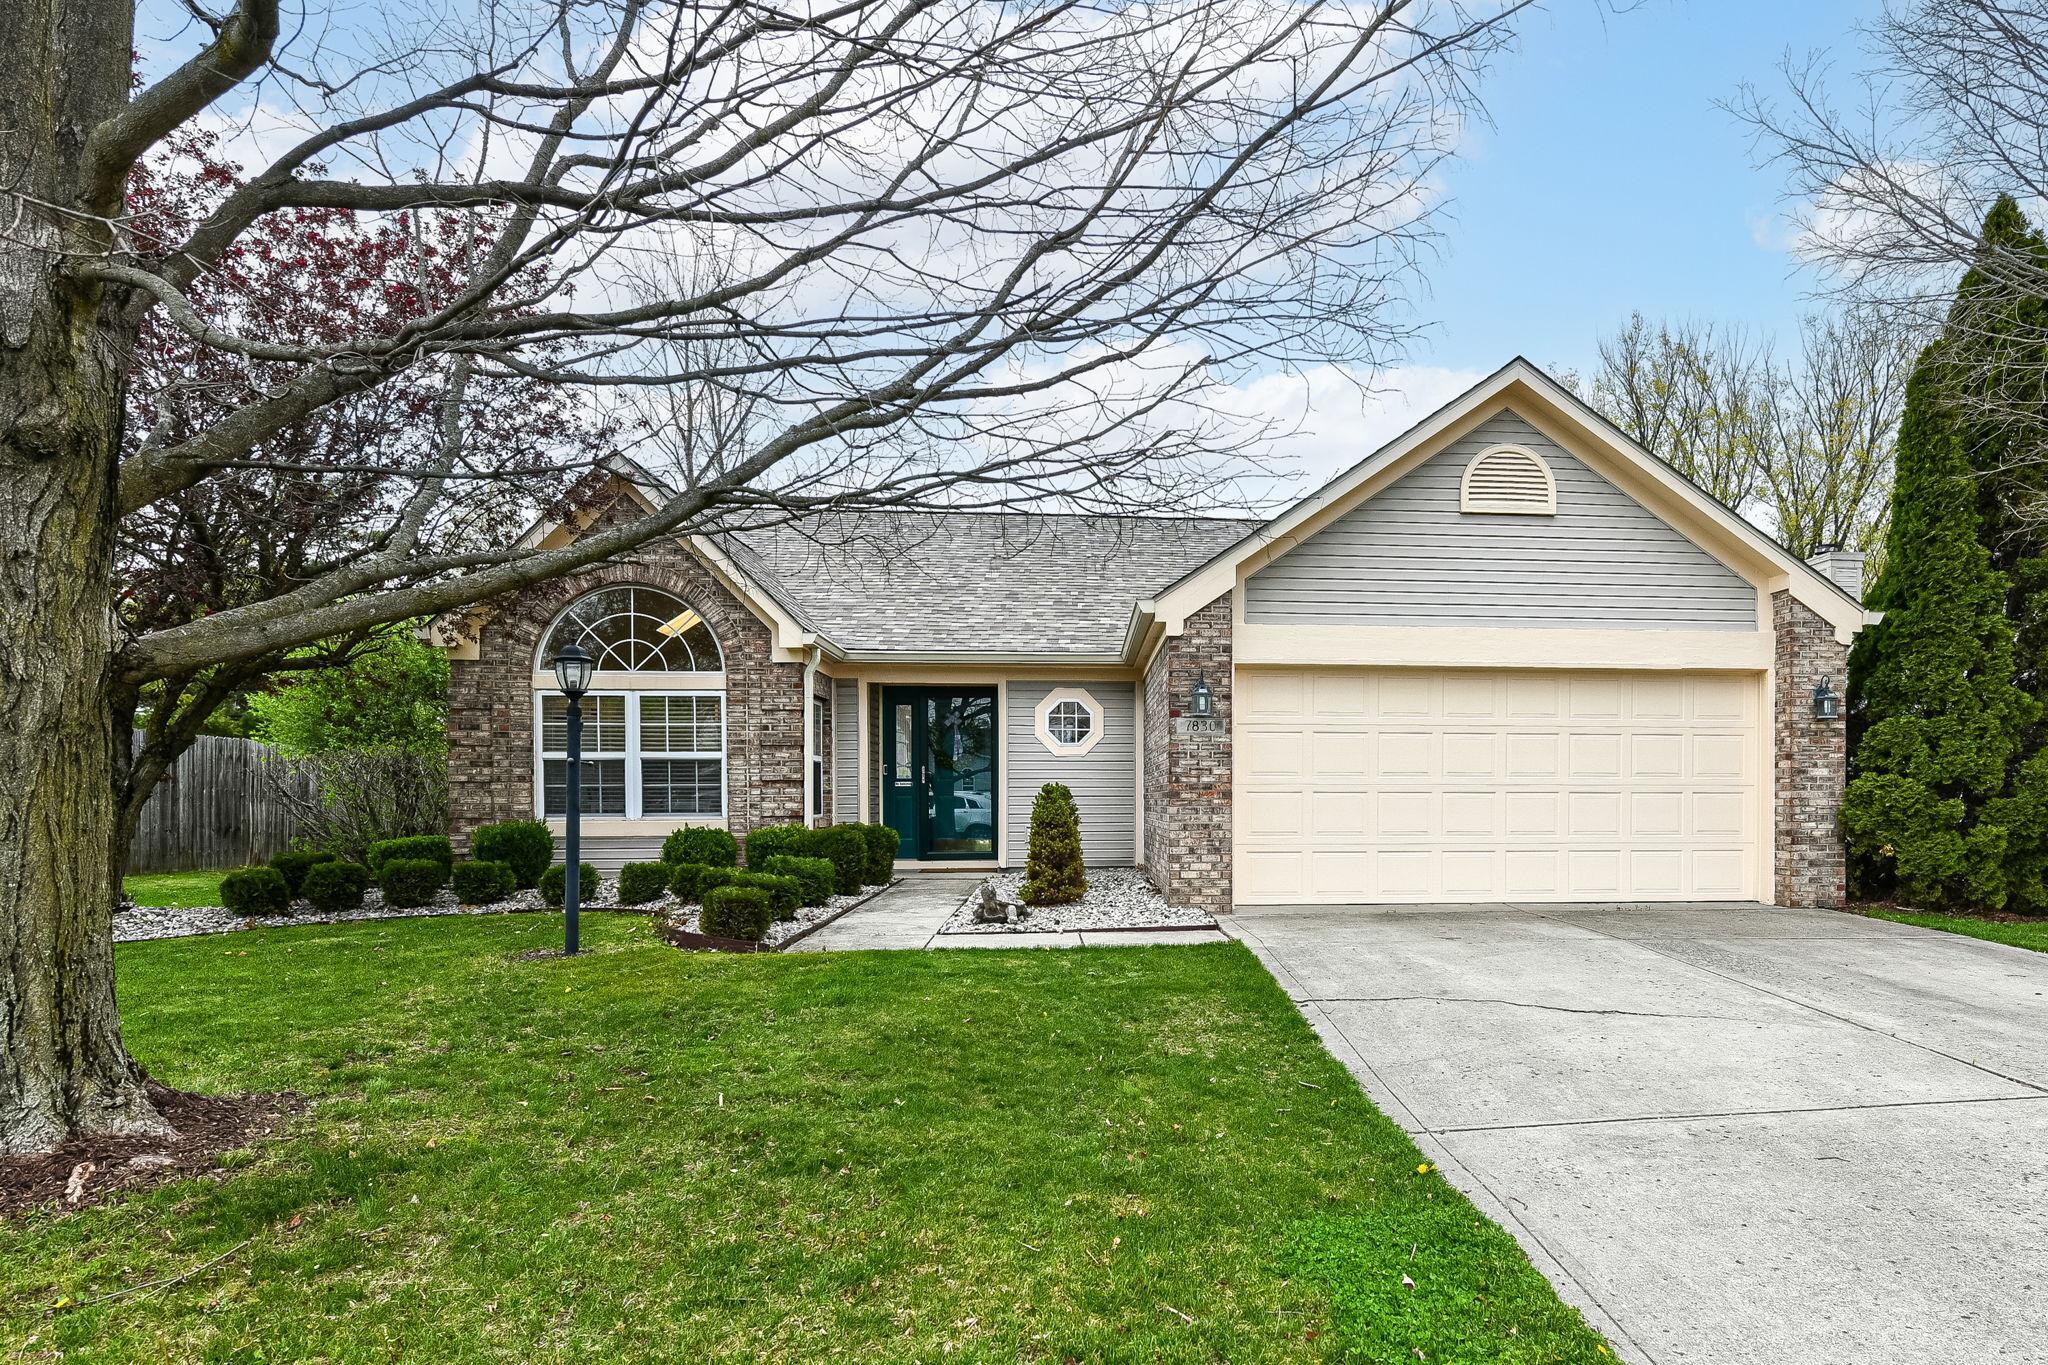 Photo one of 7830 High View Dr Indianapolis IN 46236 | MLS 21972669